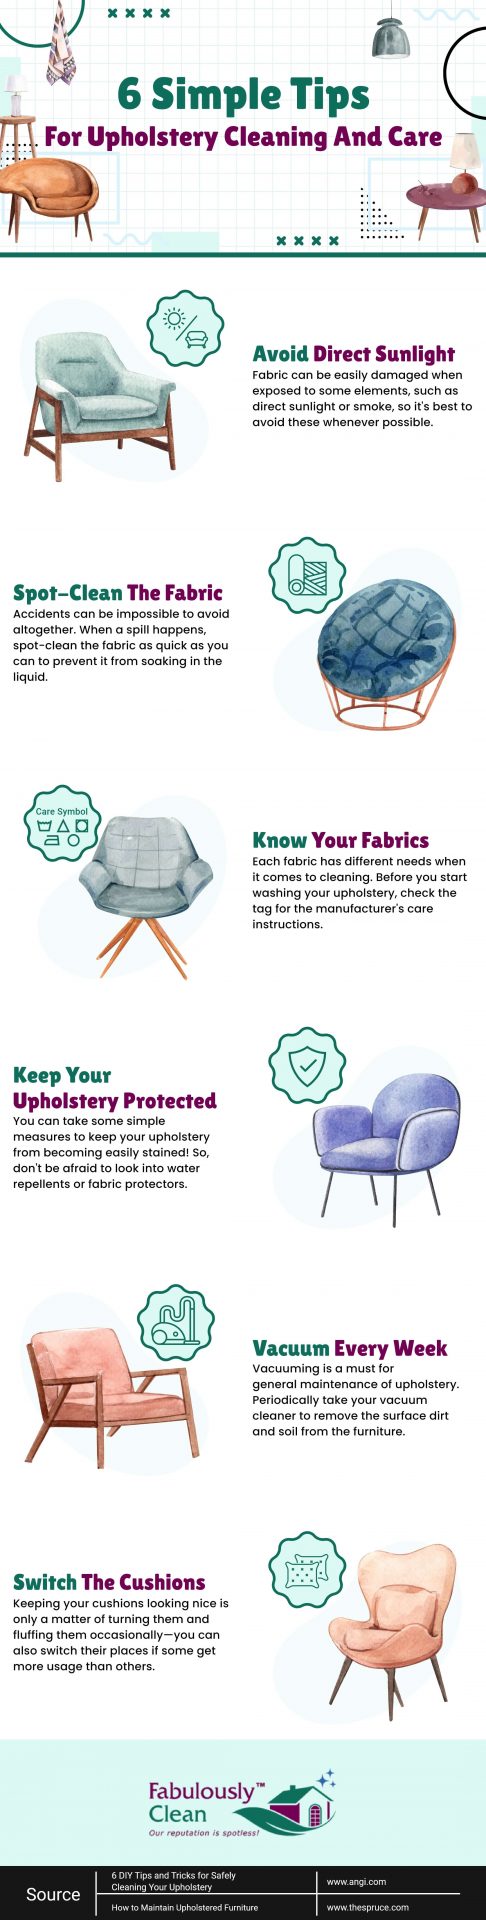 Professional Upholstery Cleaning vs. DIY - Smart Choice Cleaning